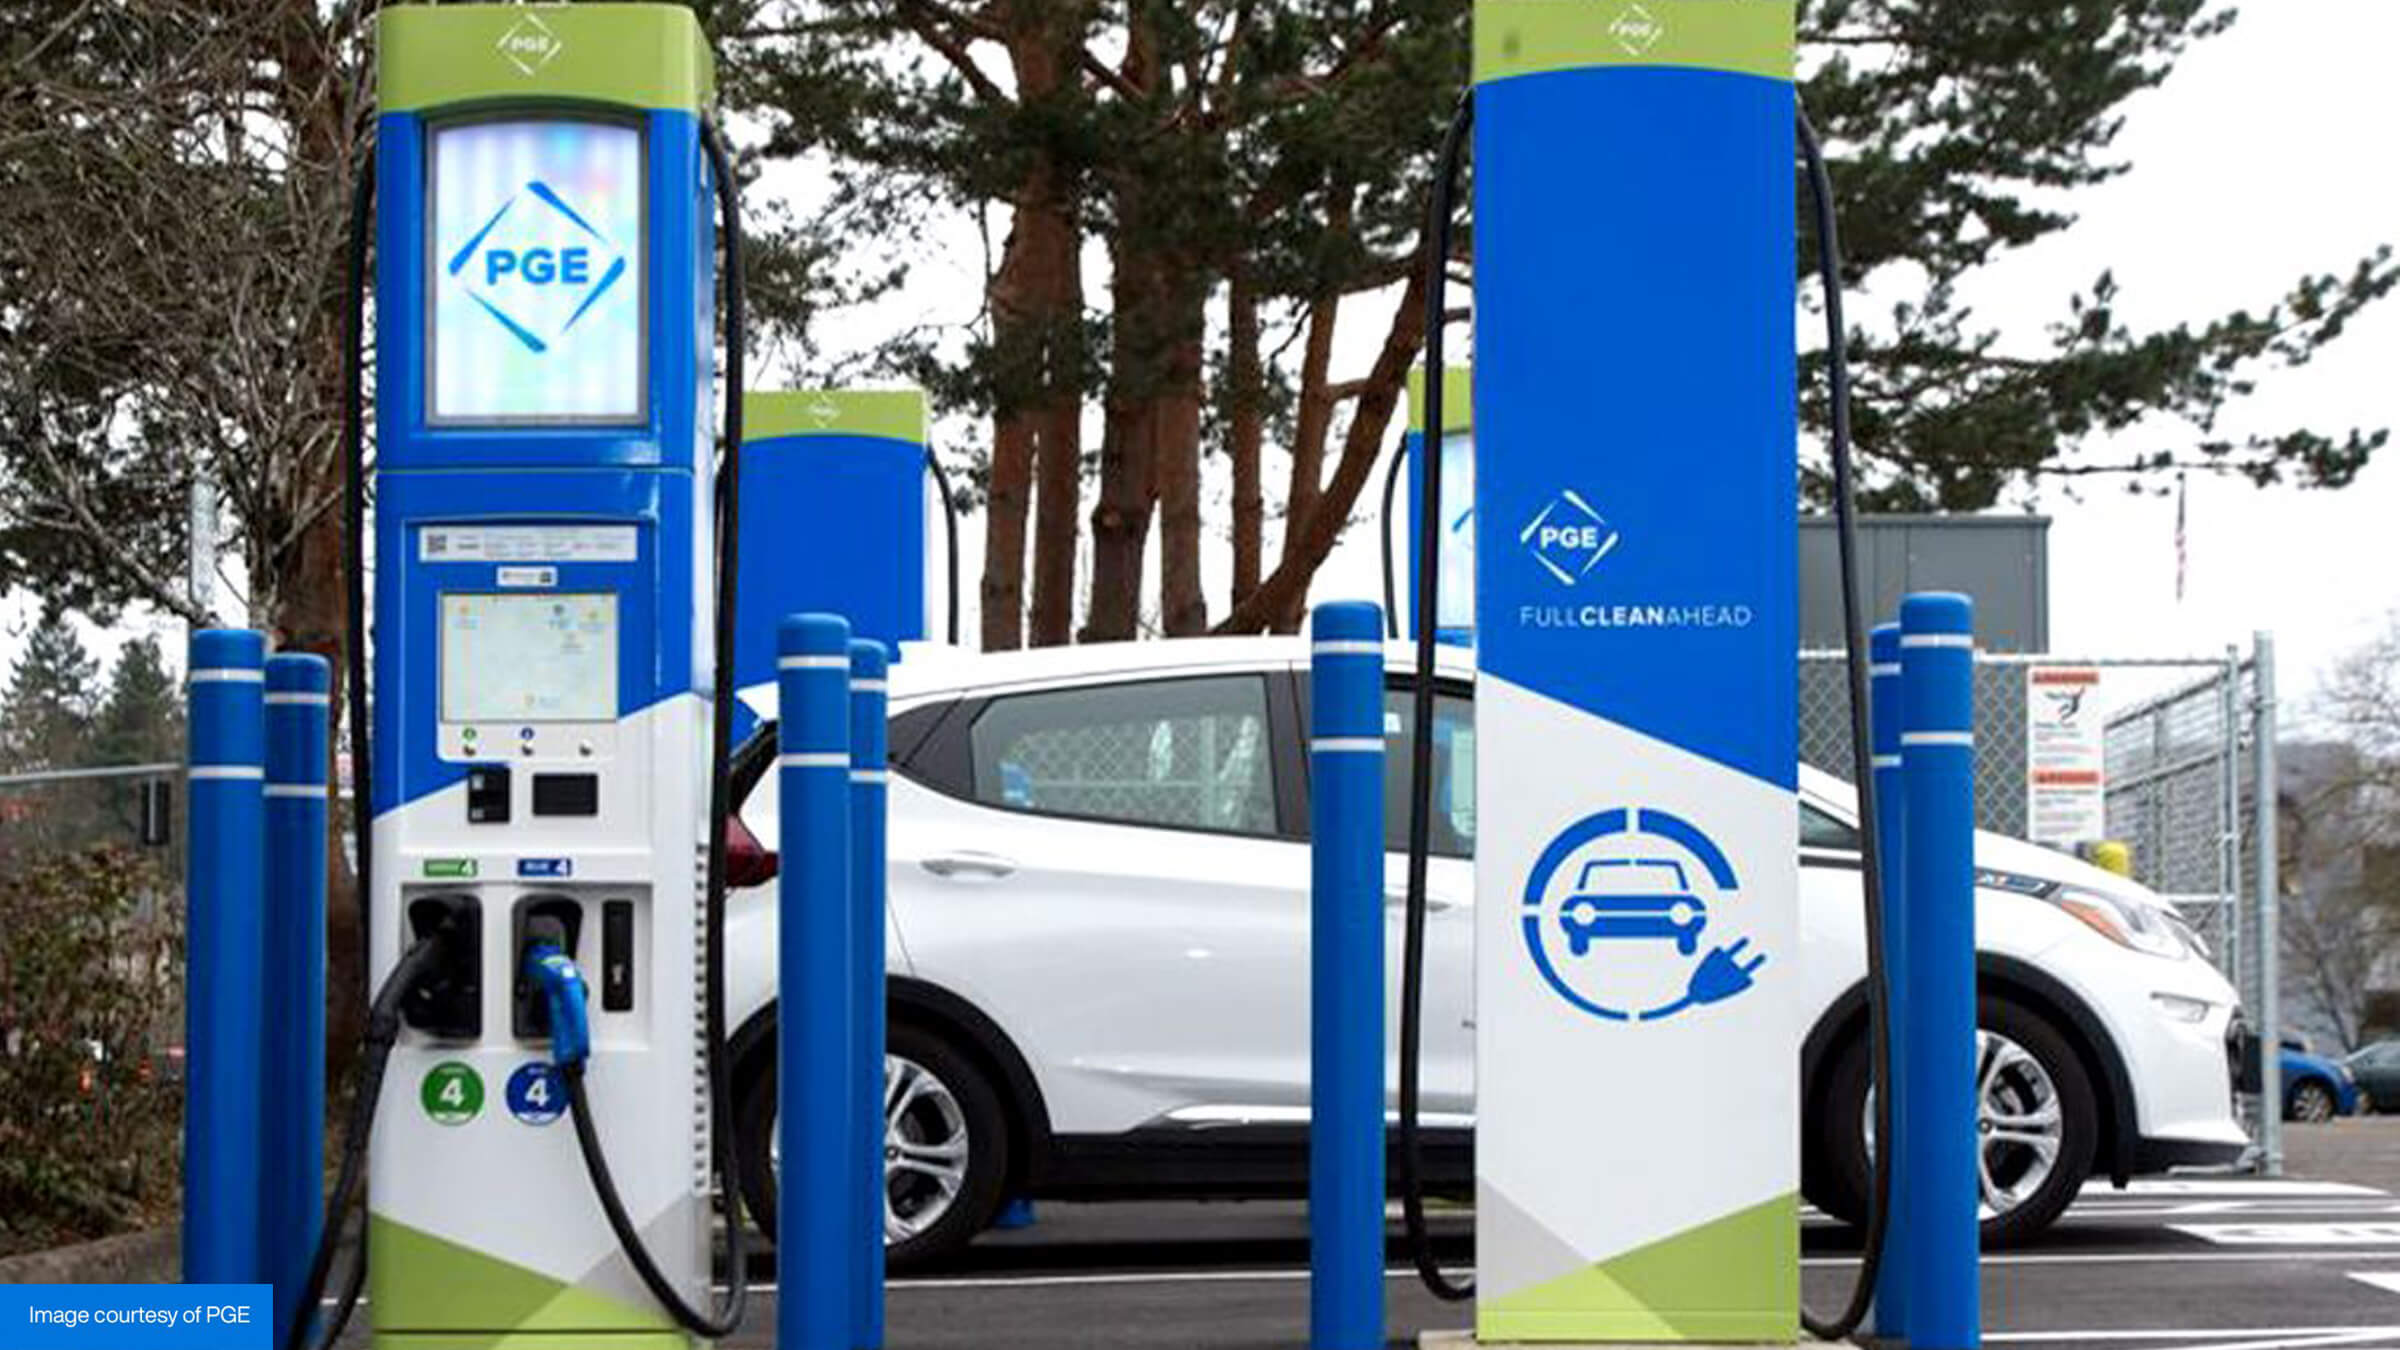 Portland General Electric ad campaign vehicle and charging stations